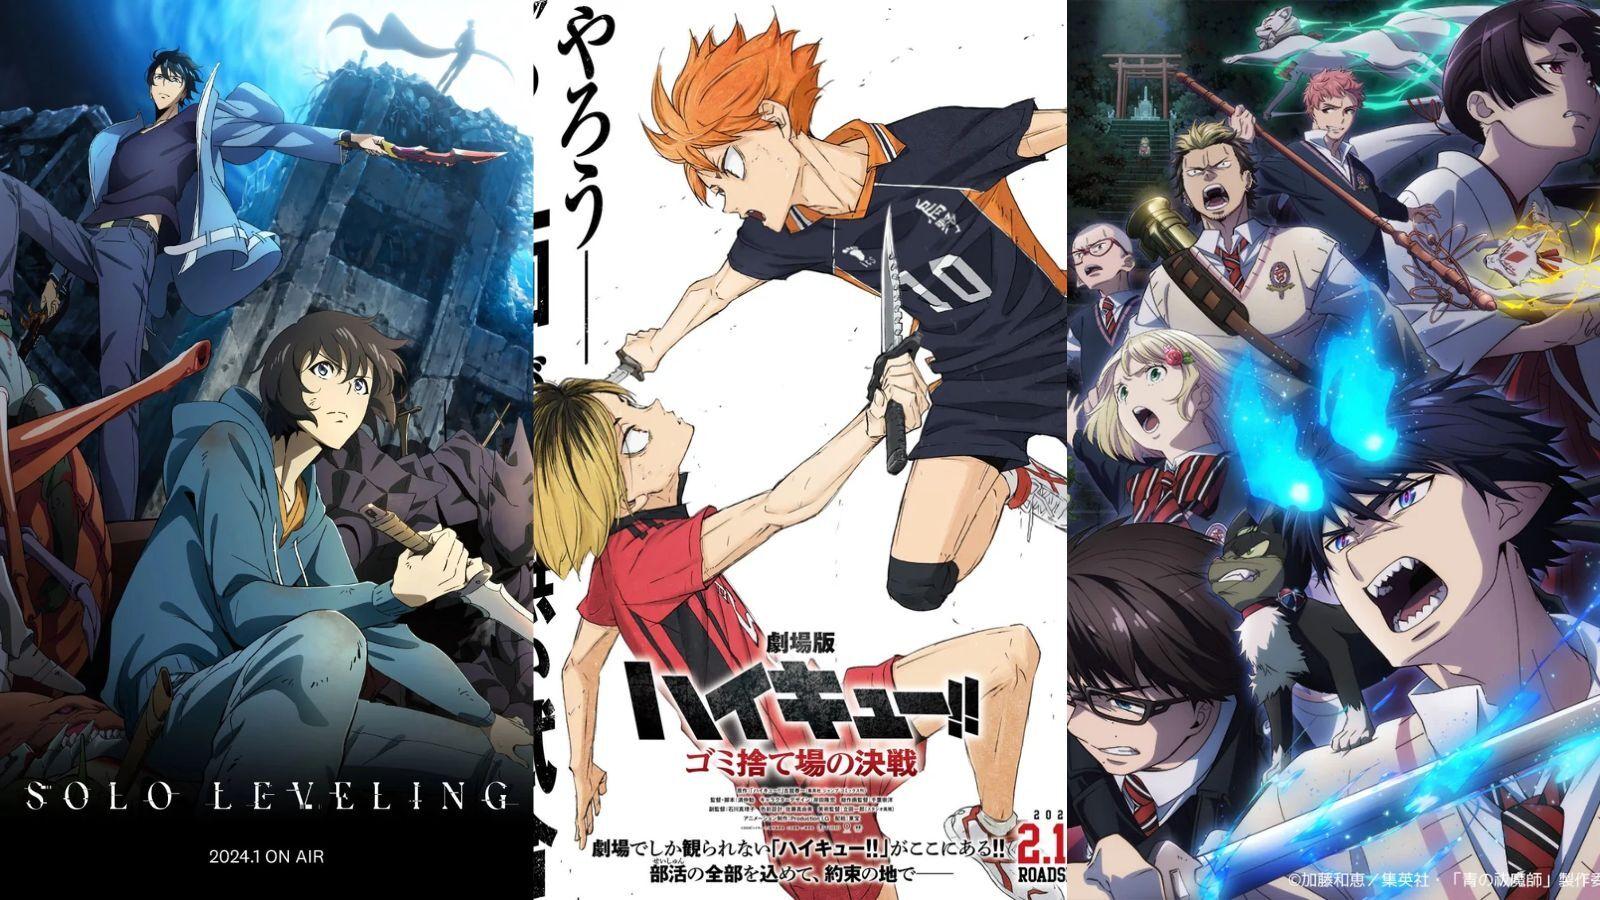 All the new anime coming to Crunchyroll in winter 2024